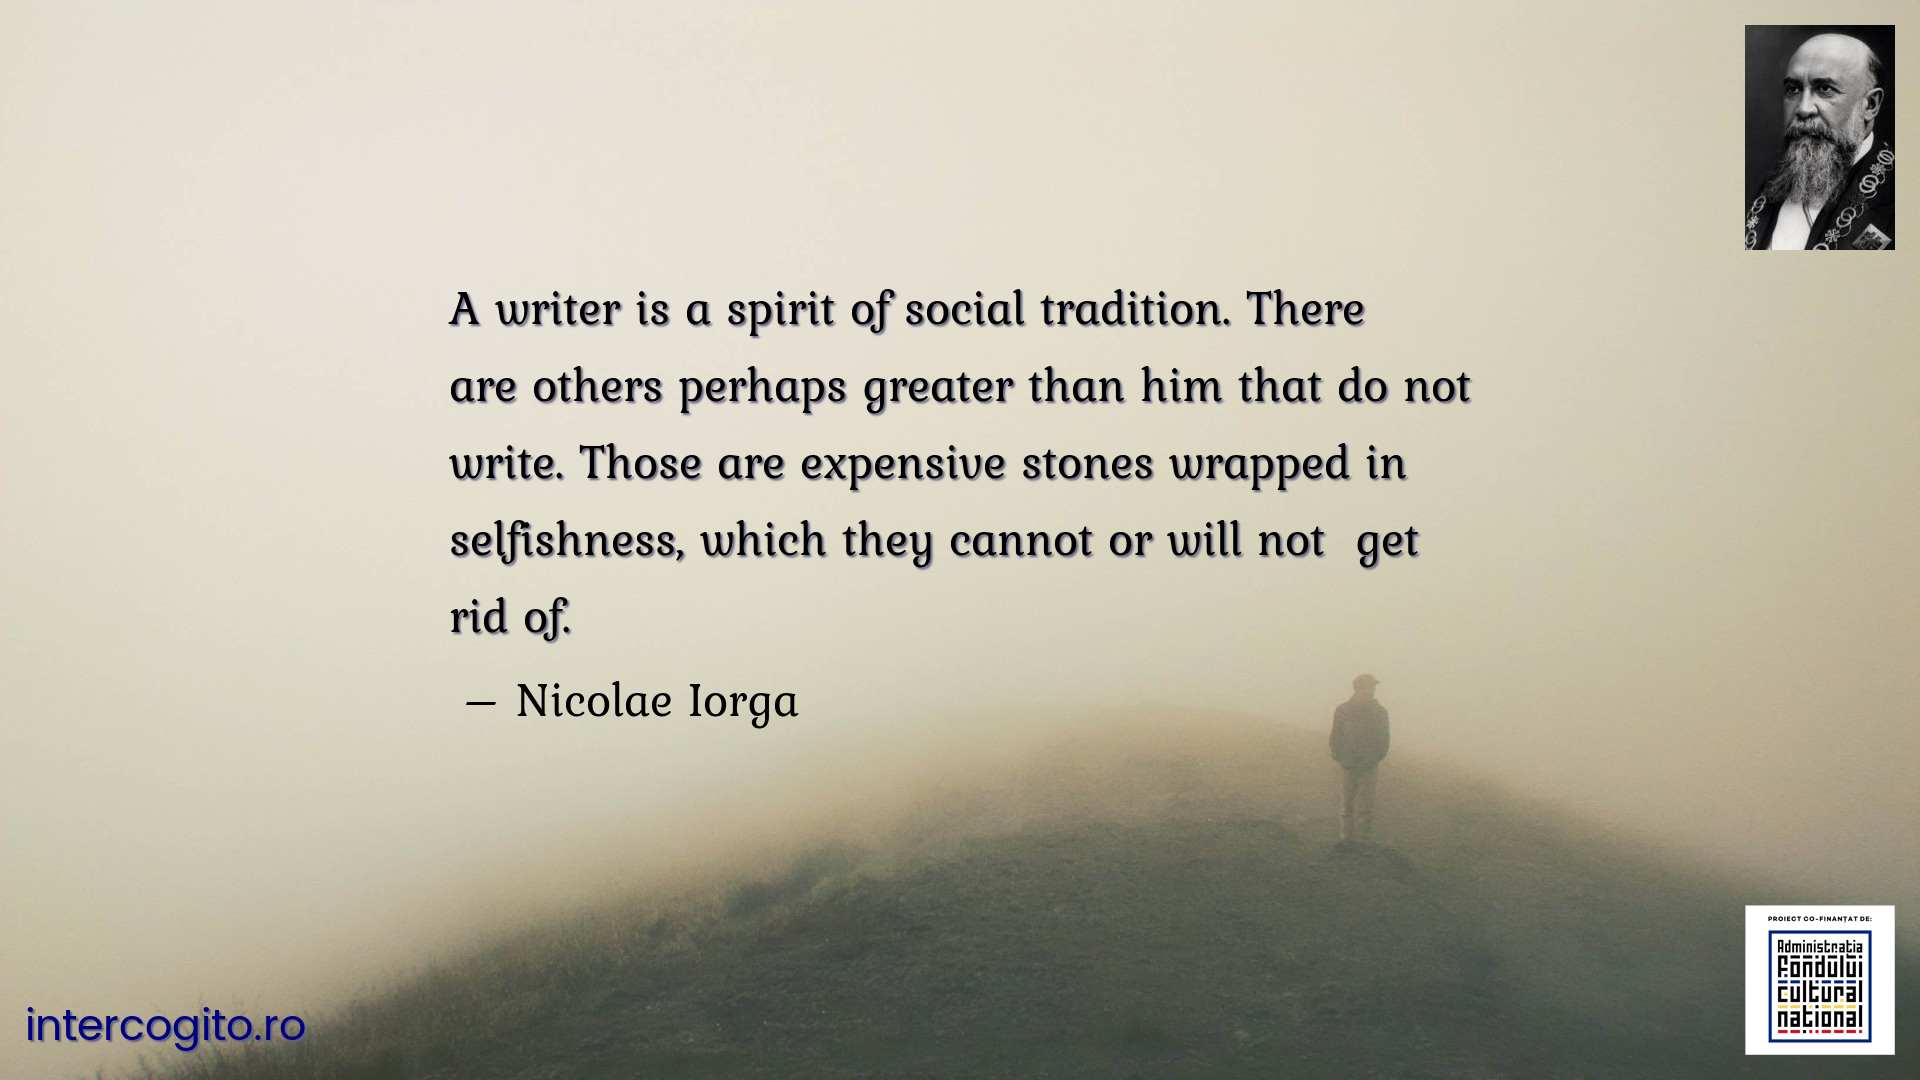 A writer is a spirit of social tradition. There are others perhaps greater than him that do not write. Those are expensive stones wrapped in selfishness, which they cannot or will not  get rid of.